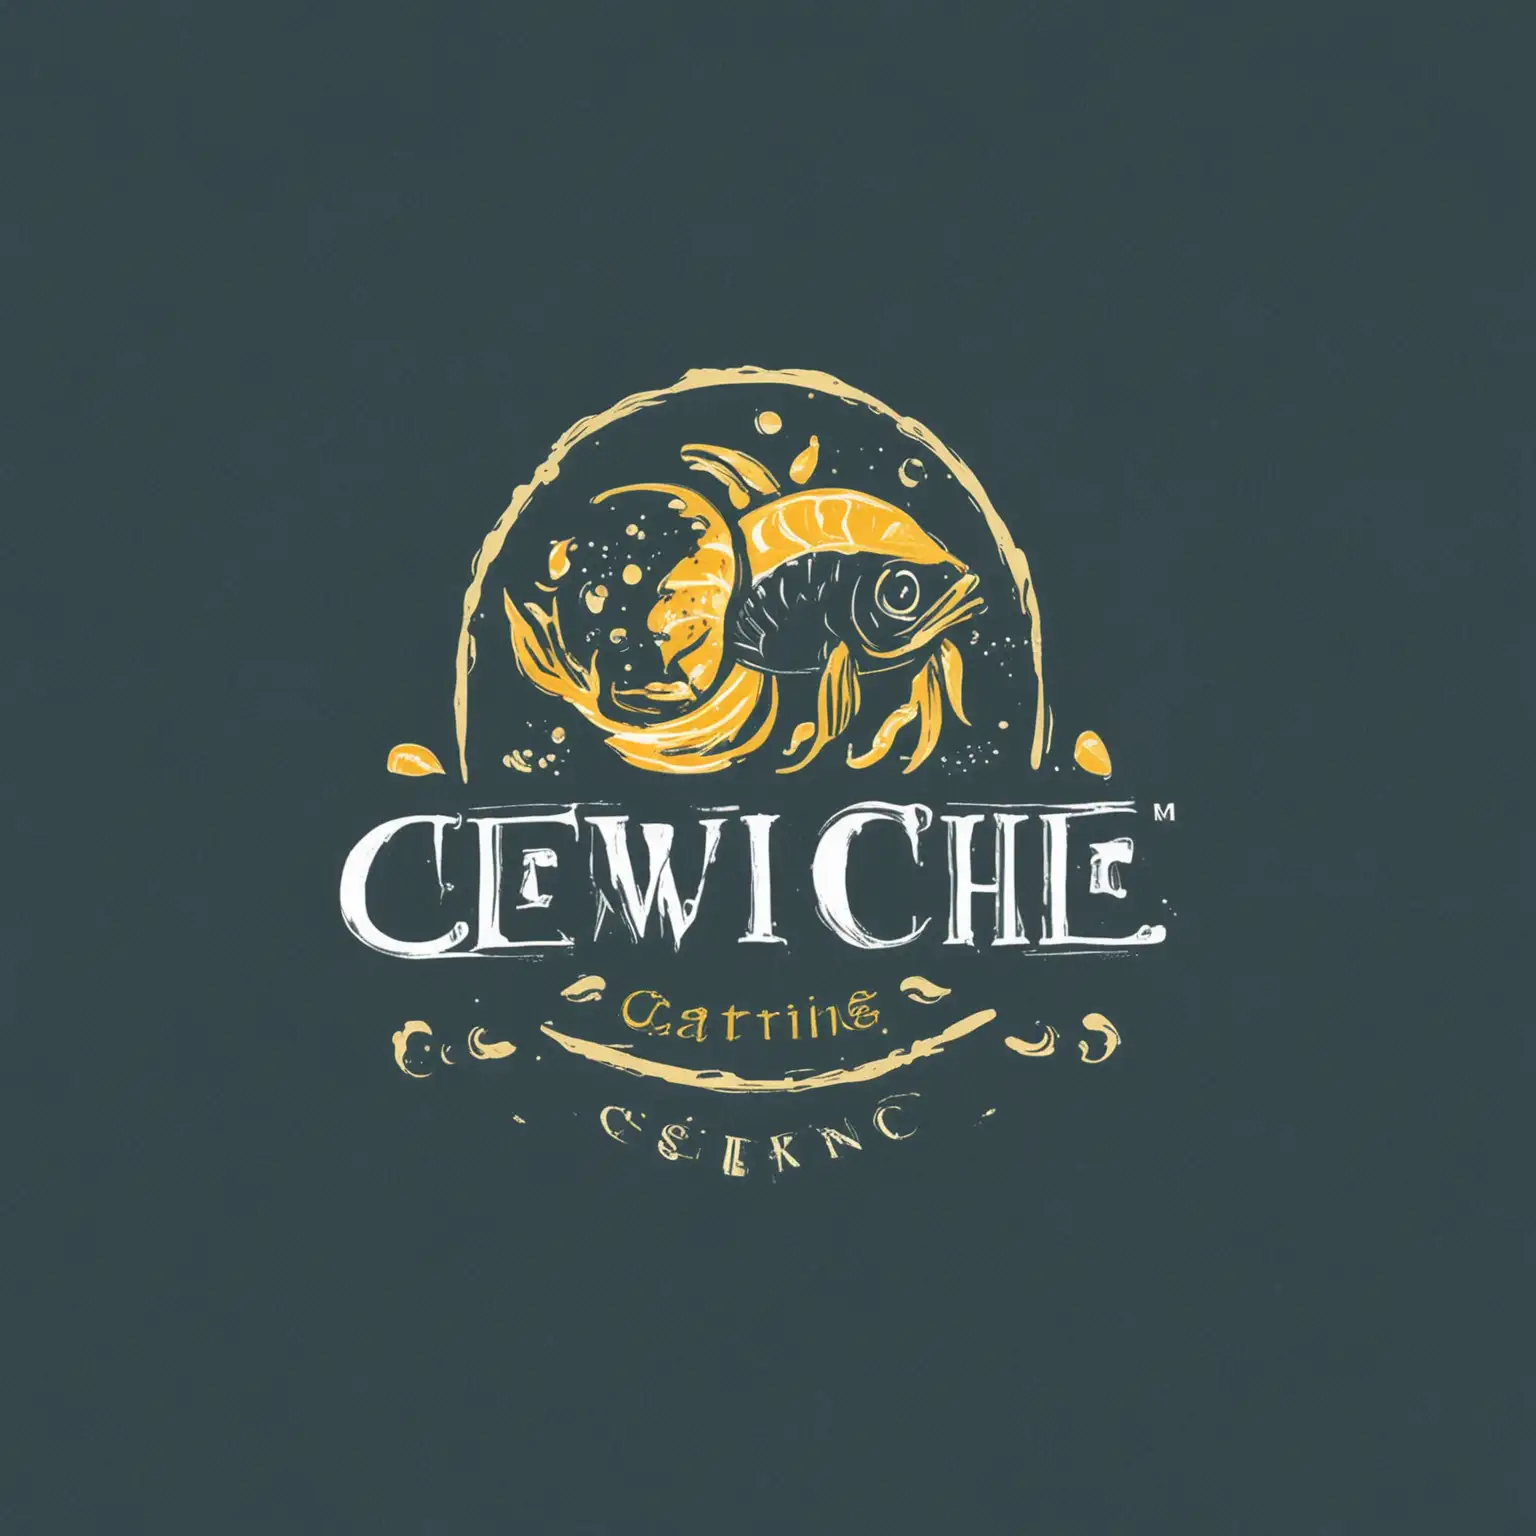 Elegant Ceviche Seafood Catering Logo with Modern Font and Oceanic Palette